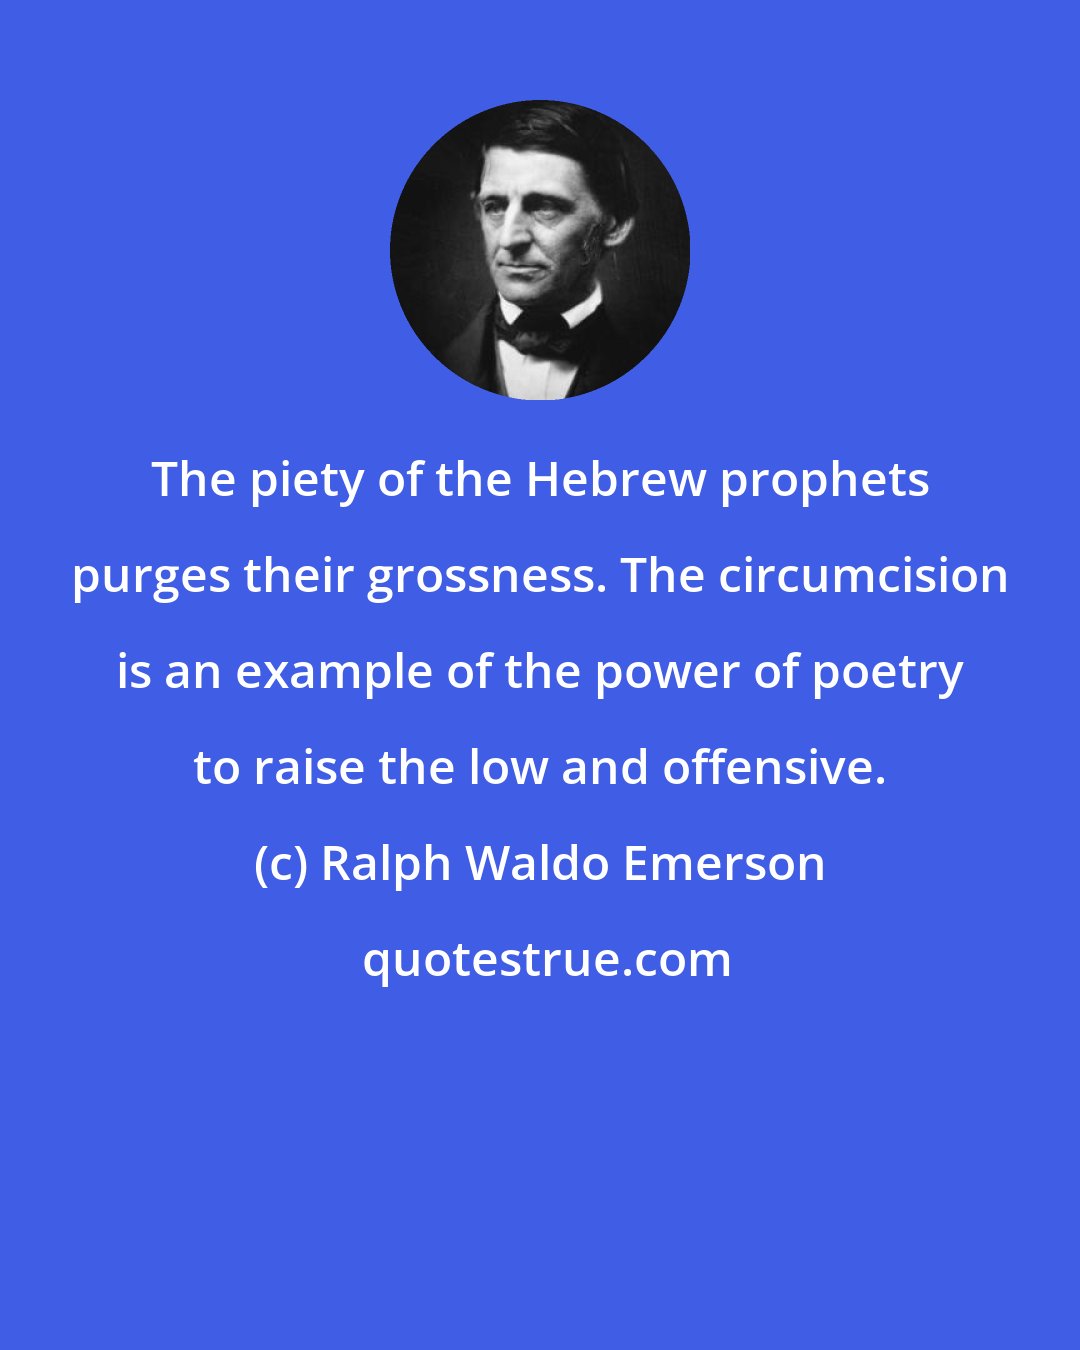 Ralph Waldo Emerson: The piety of the Hebrew prophets purges their grossness. The circumcision is an example of the power of poetry to raise the low and offensive.